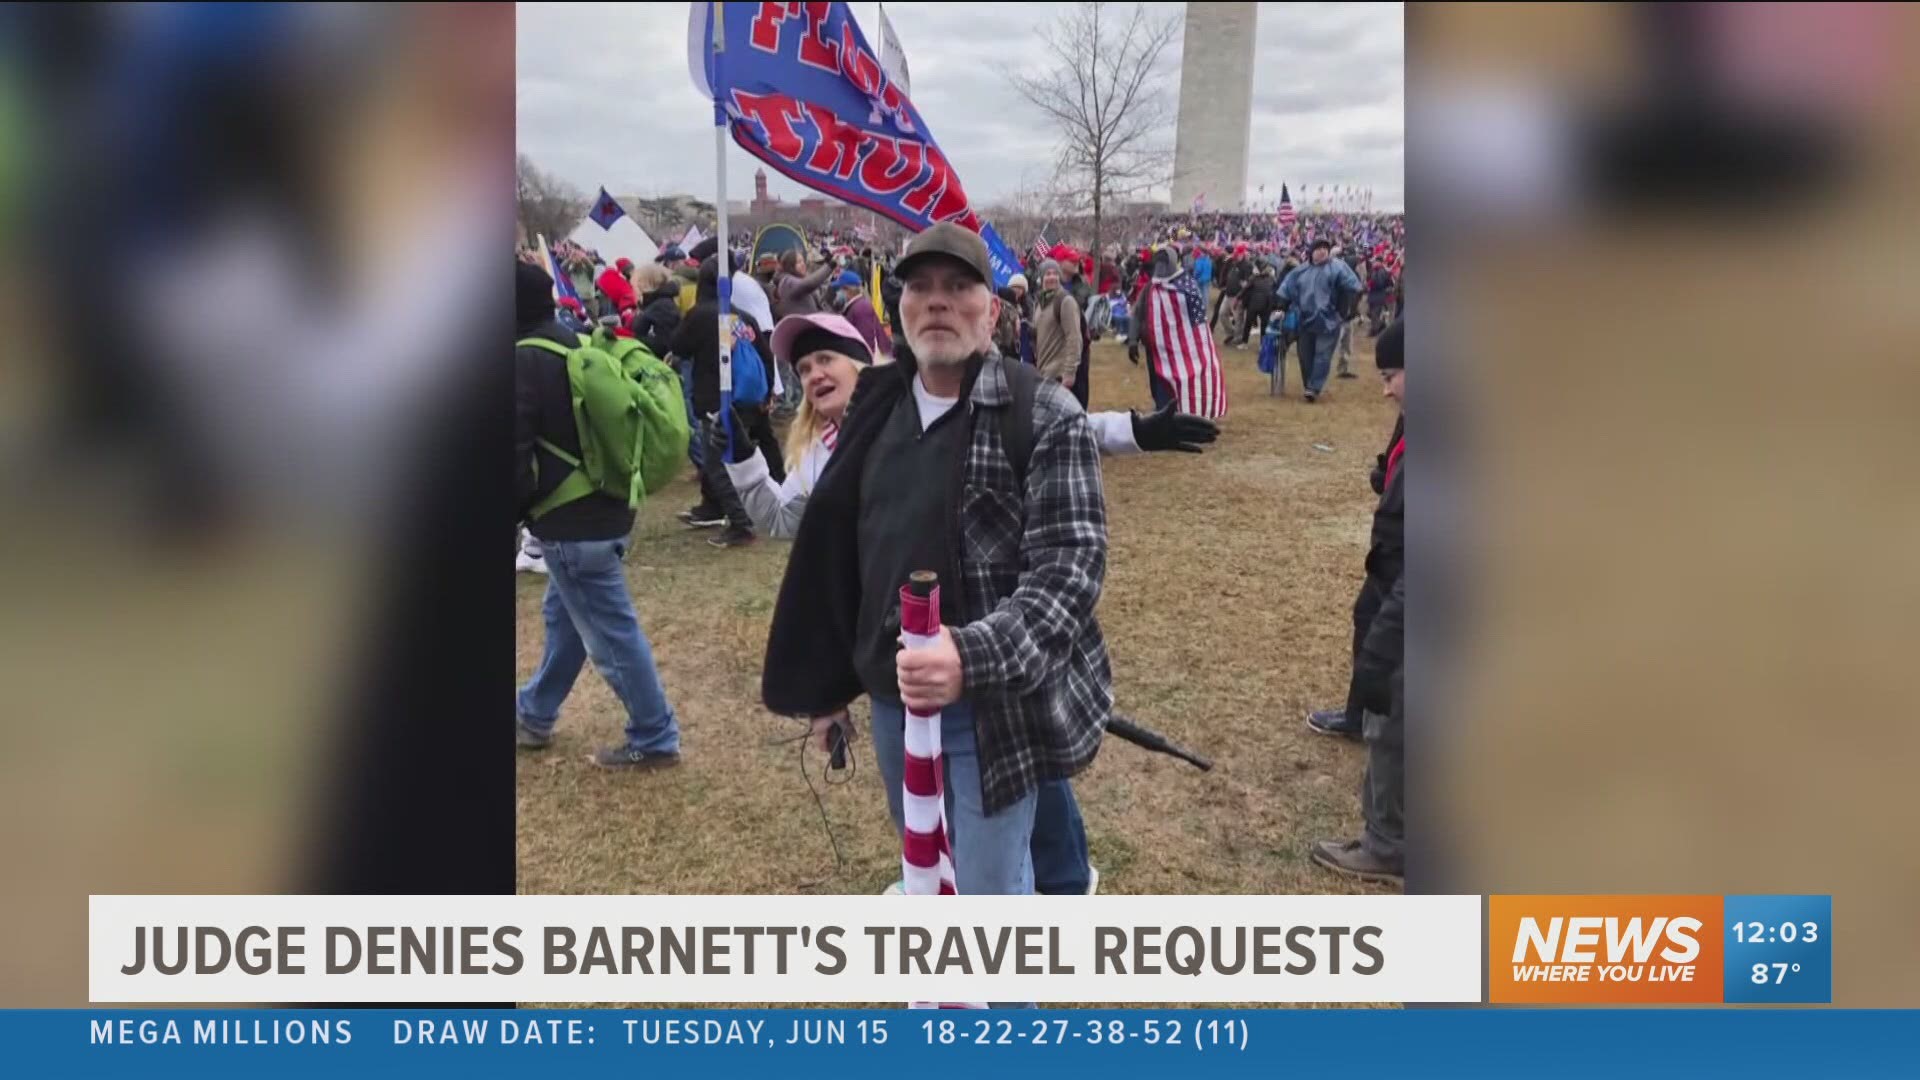 On Friday (June 18), the court denied Barnett's request to travel more than 50 miles from home.